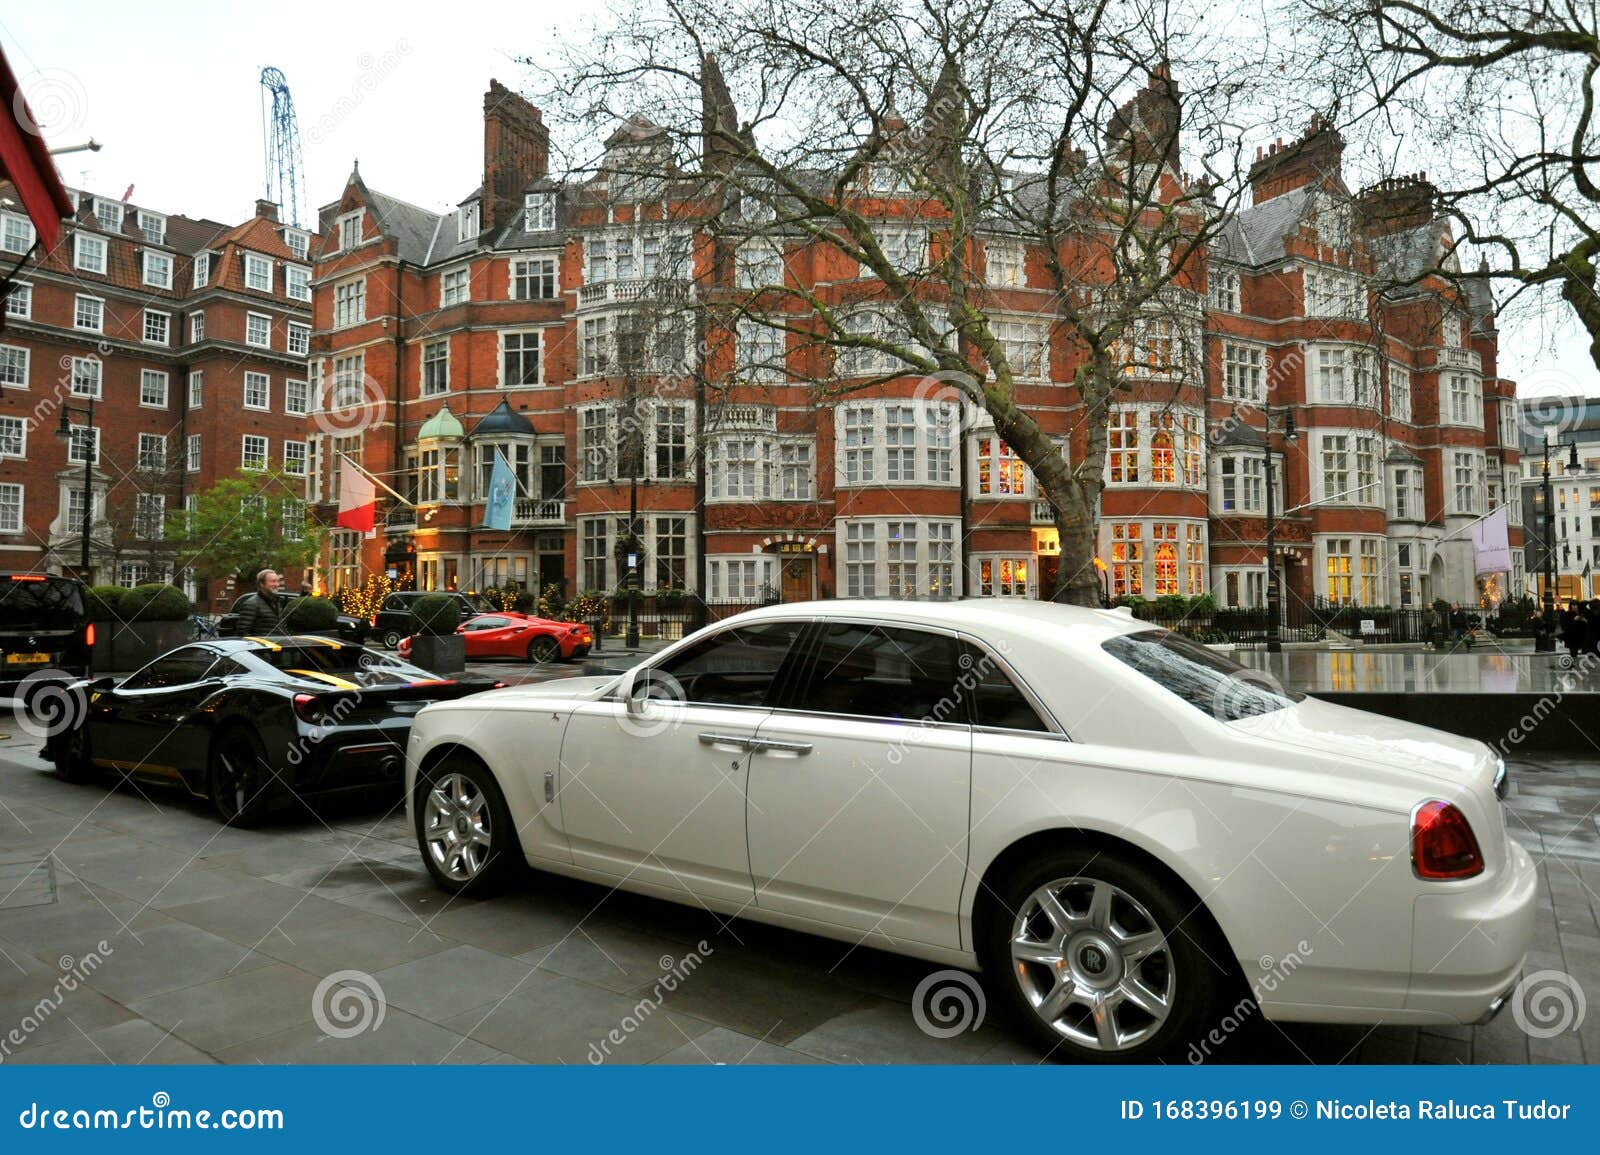 Typical House in Mayfair London with Luxury Cars Editorial Stock Image